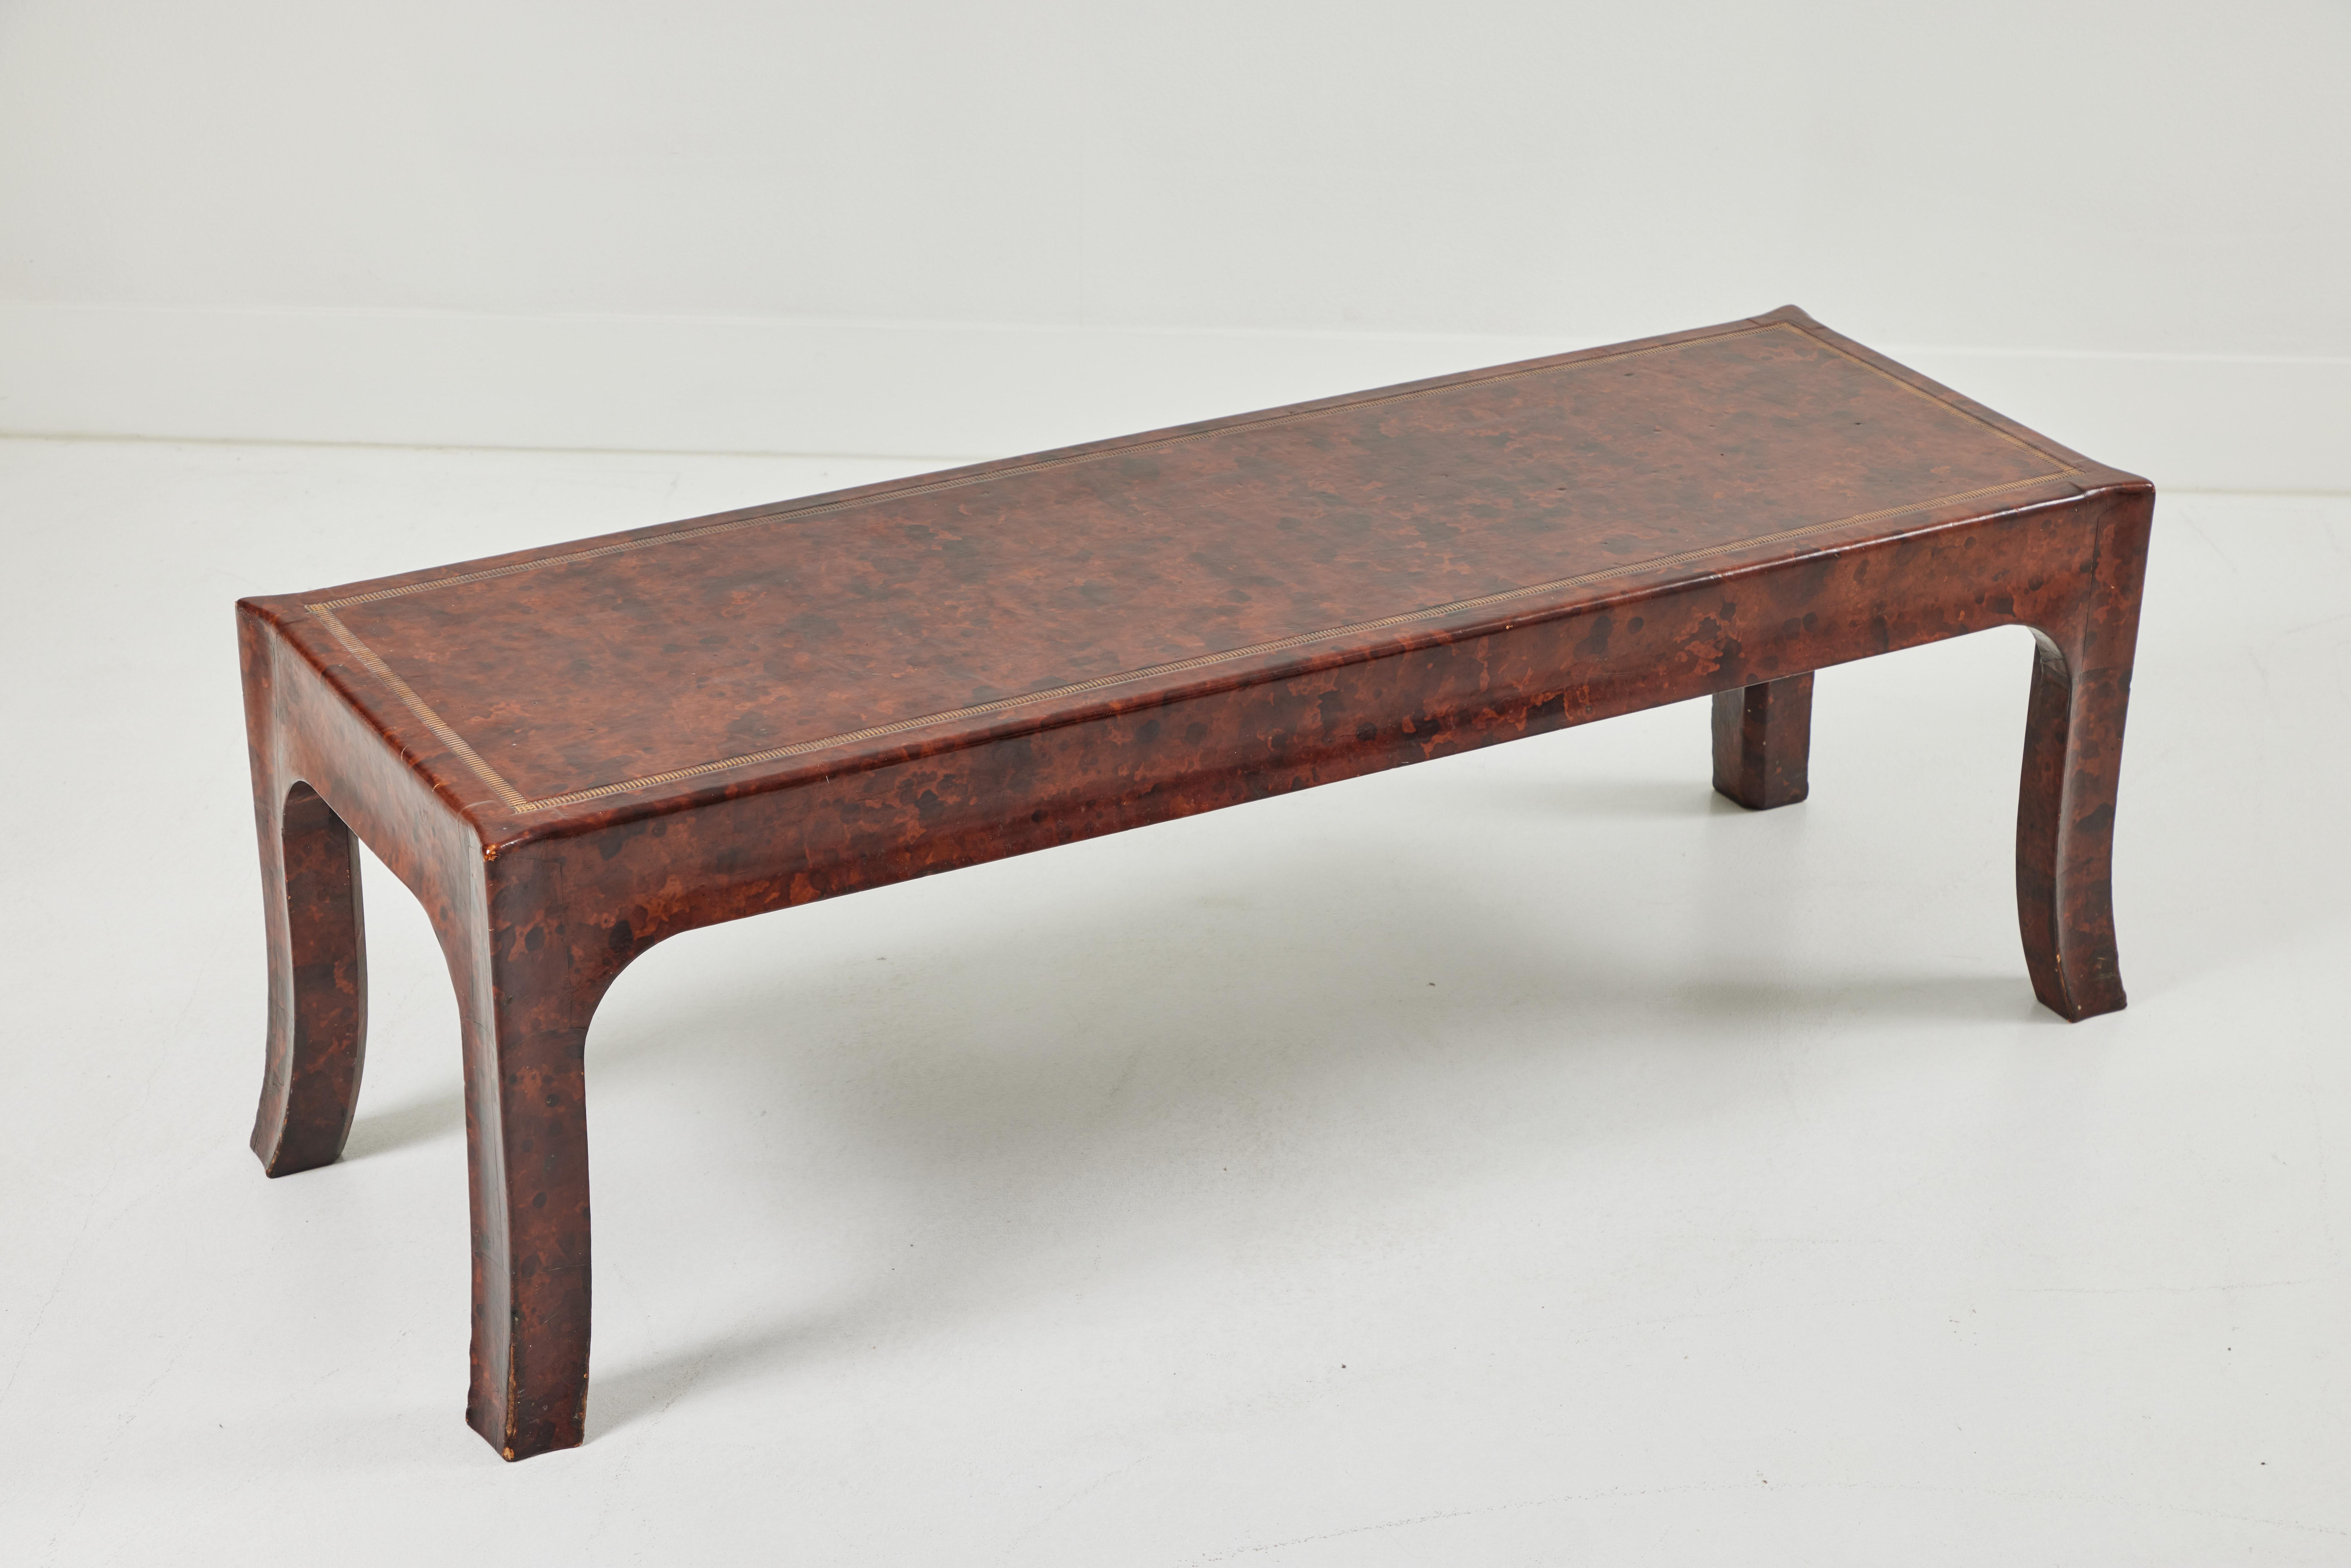 This beautifully preserved William Haines cocktail table is from the estate of Keith McCoy, a Los Angeles Legend whose showroom represented Fortuny, Robert Crowder, and P E Guerin. It is tortoise-stained leather with gold embossed detailing around